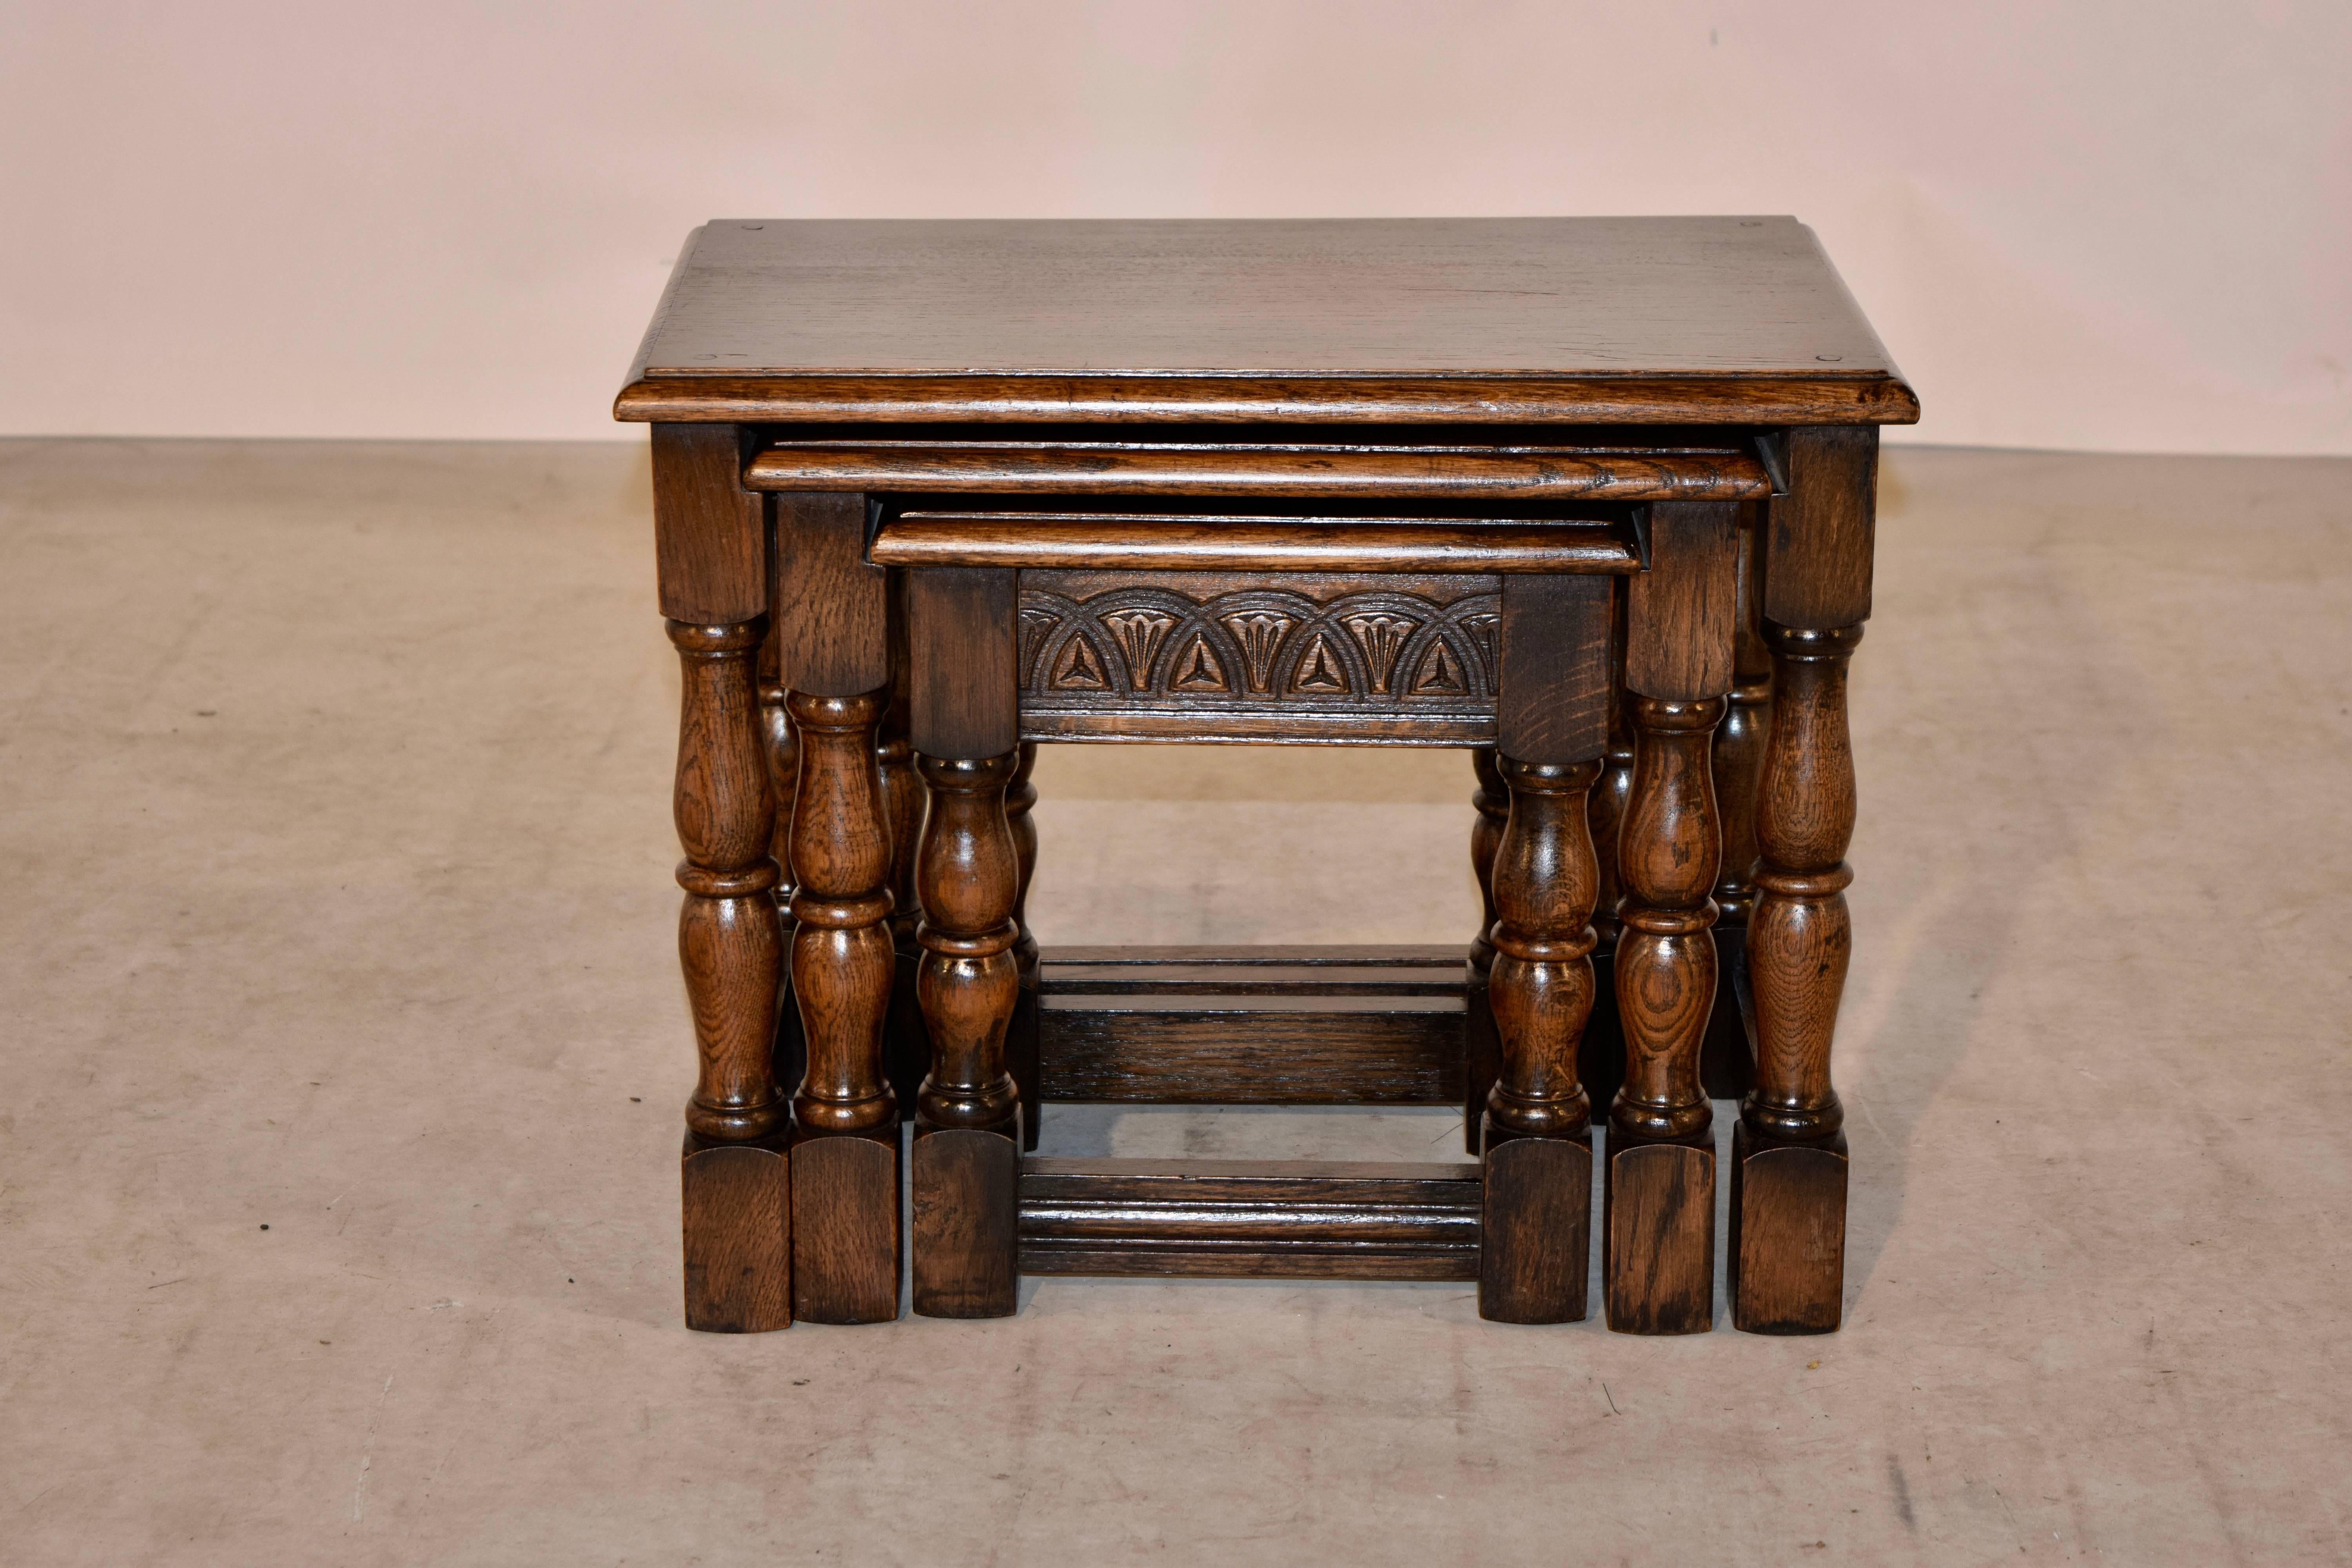 Nest of three oak tables with beveled edges around the tops, following down to hand-carved decorated aprons and supported on hand-turned legs, joined by reeded stretchers, circa 1900. The small table measures 12 x 9.63 x 13.5, and the medium table